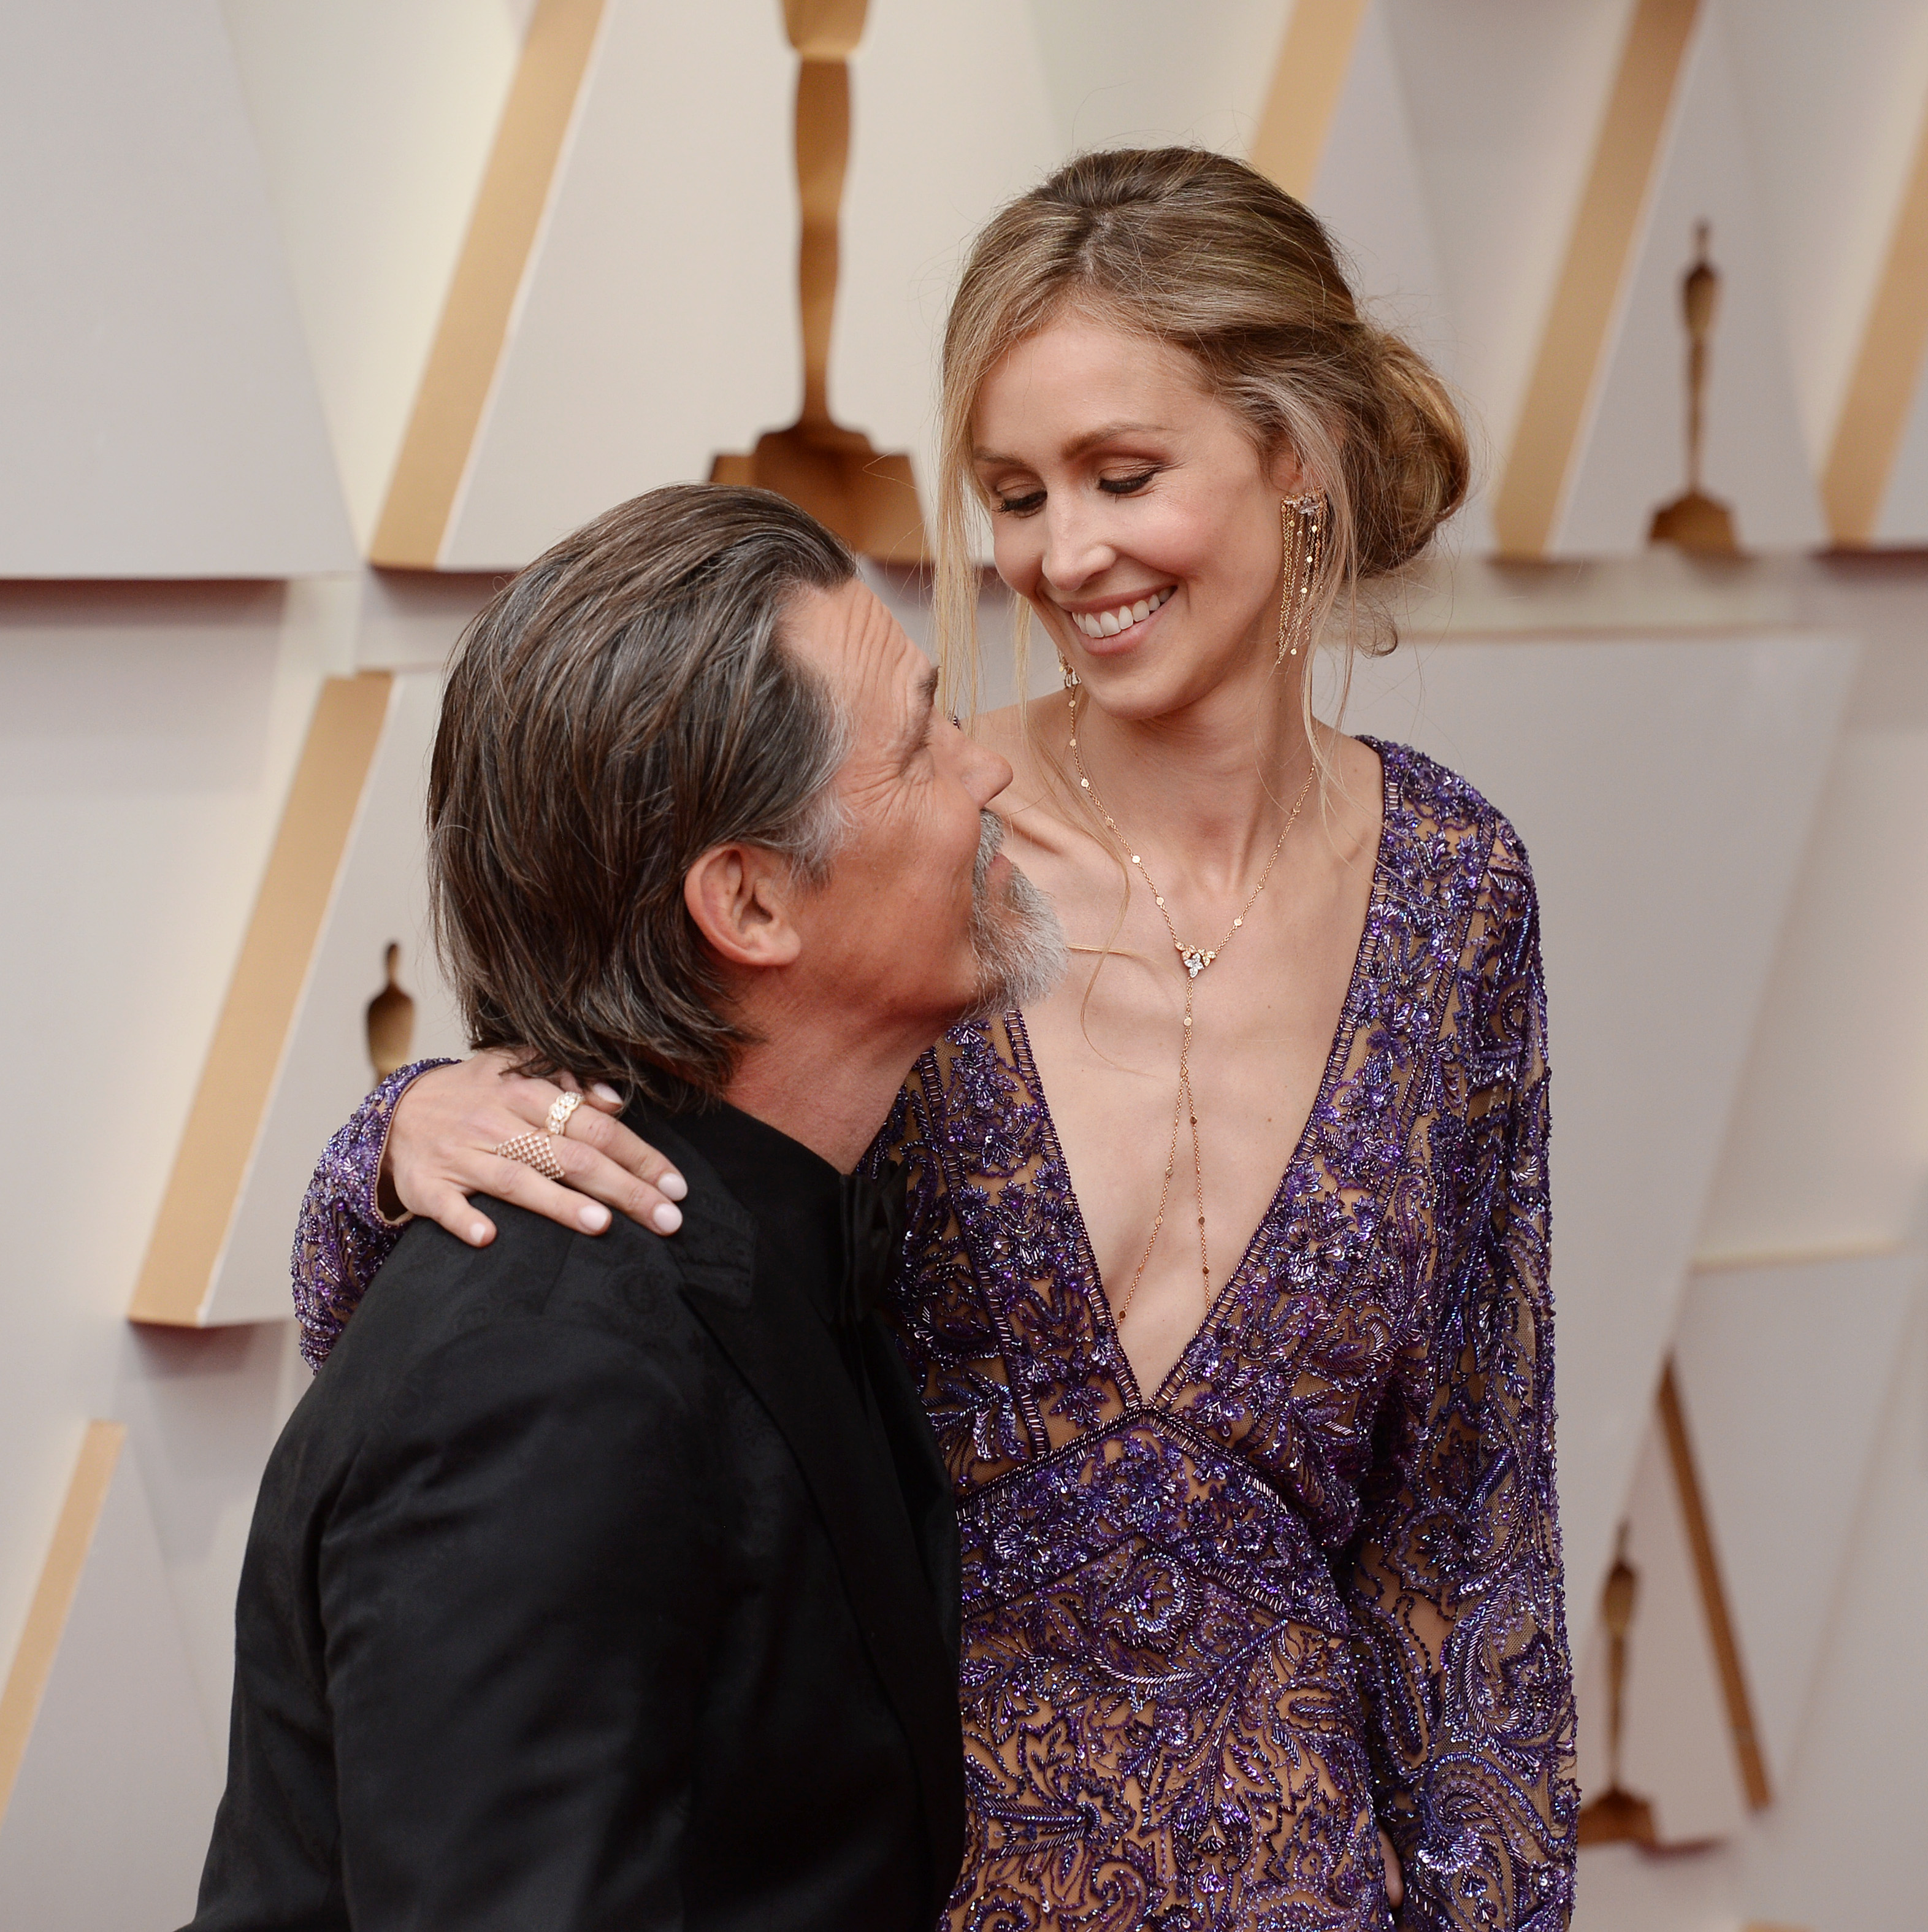 Josh Brolin and Kathryn Boyd at the 94th Academy Awards at Dolby Theatre at the Hollywood & Highland Center on March 27, 2022 in Los Angeles, California. | Source: Getty Images